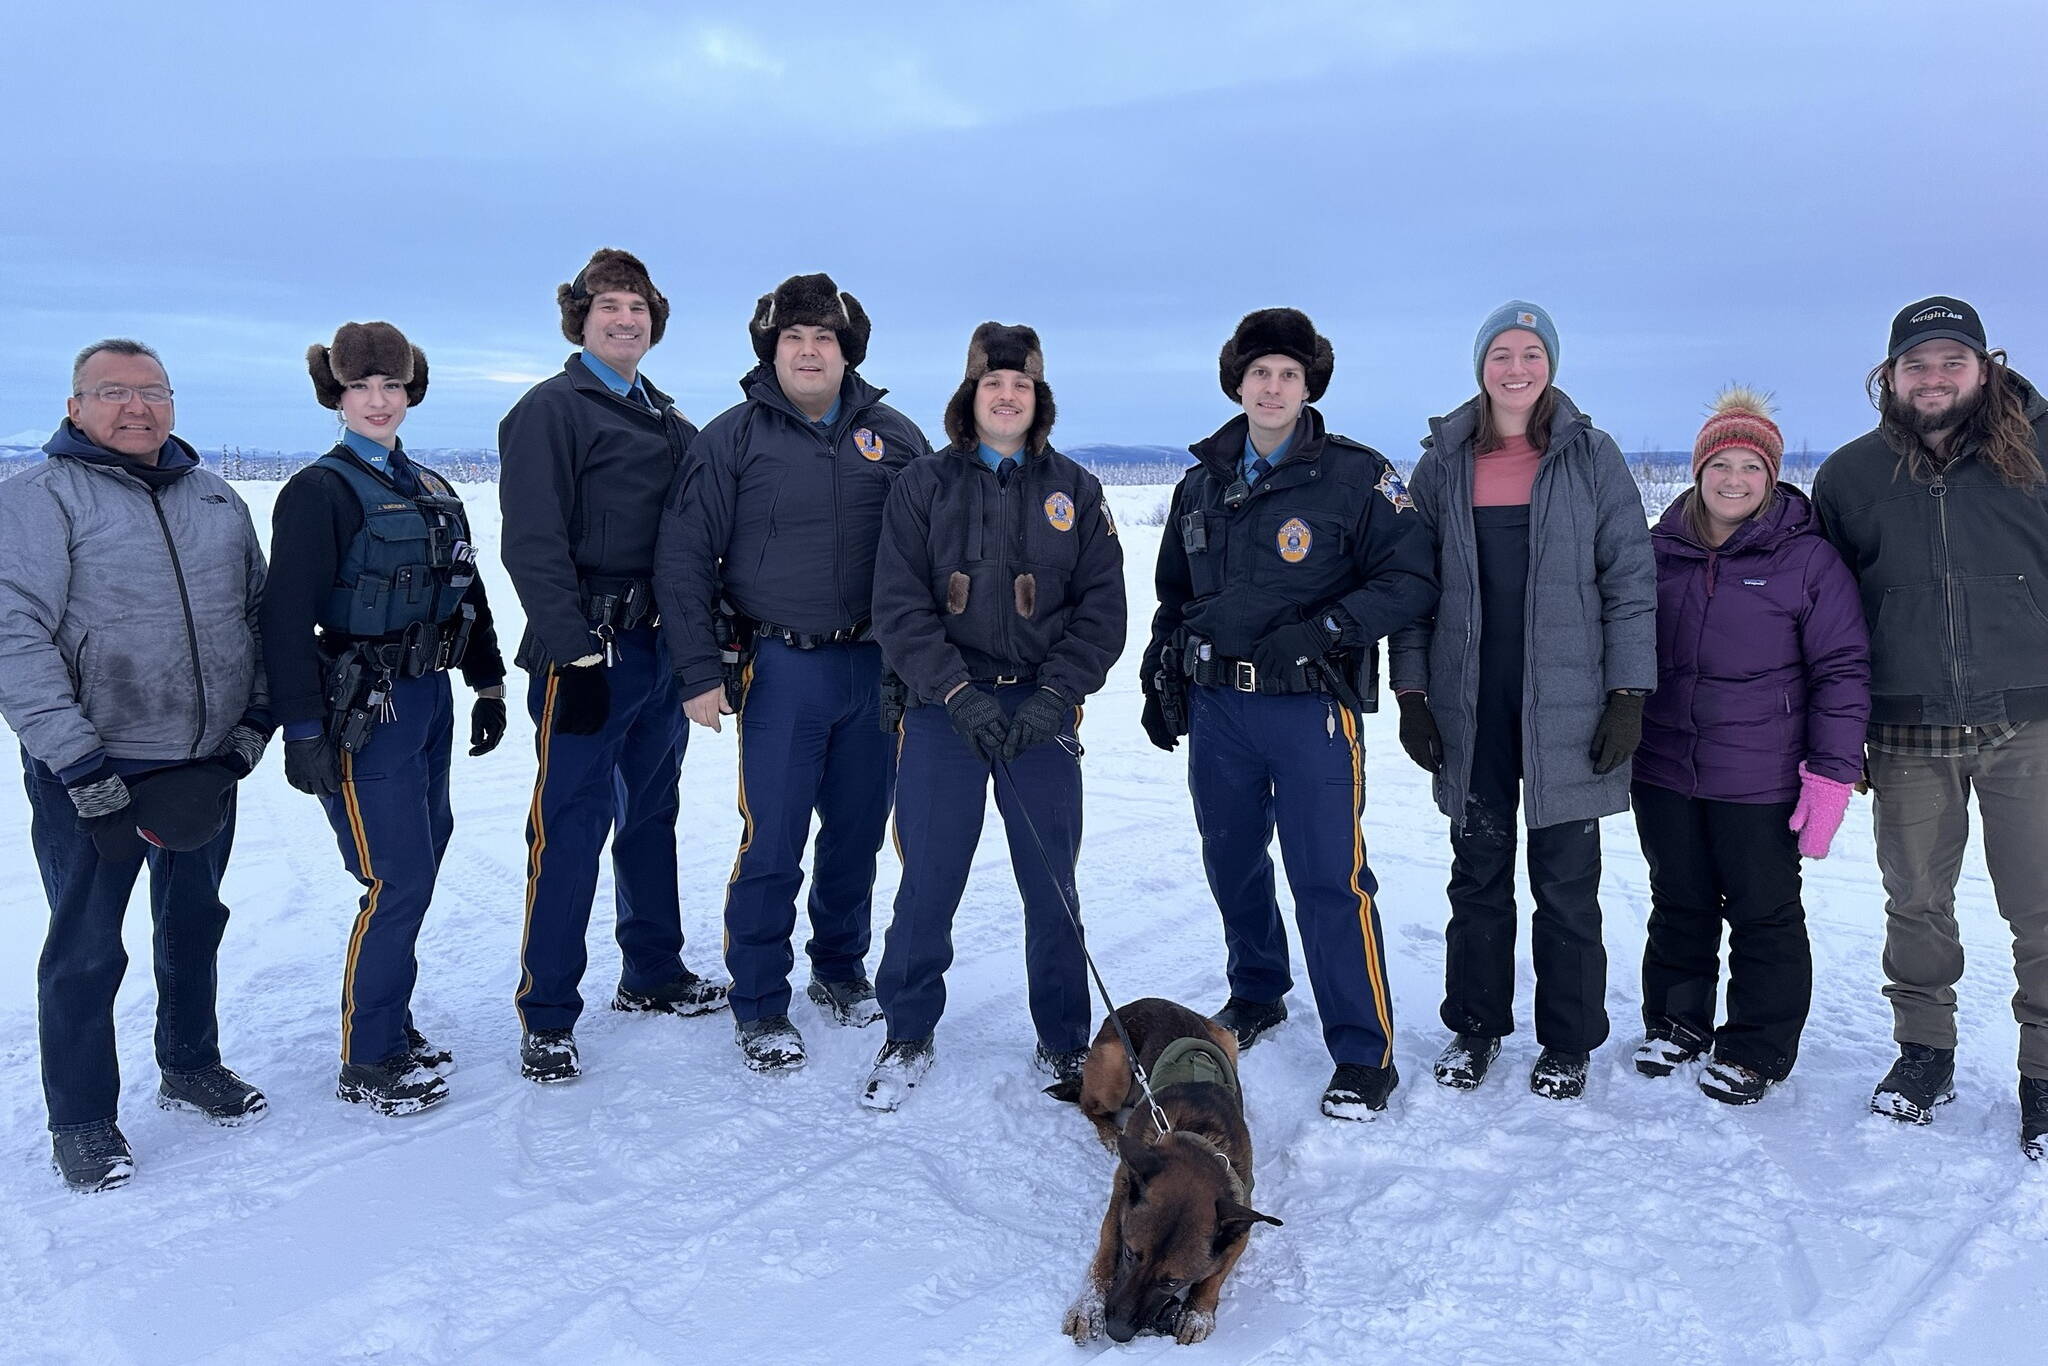 Fairbanks-based Alaska State Troopers visiting the Interior village of Allakaket in December 2023 pose for a photo while wearing fur hats. Such hats are provided by the state to help troopers work in cold conditions. The Department of Public Safety is now seeking to replenish its supply of fur hats to be used by troopers. (Photo provided by the Alaska State Troopers)